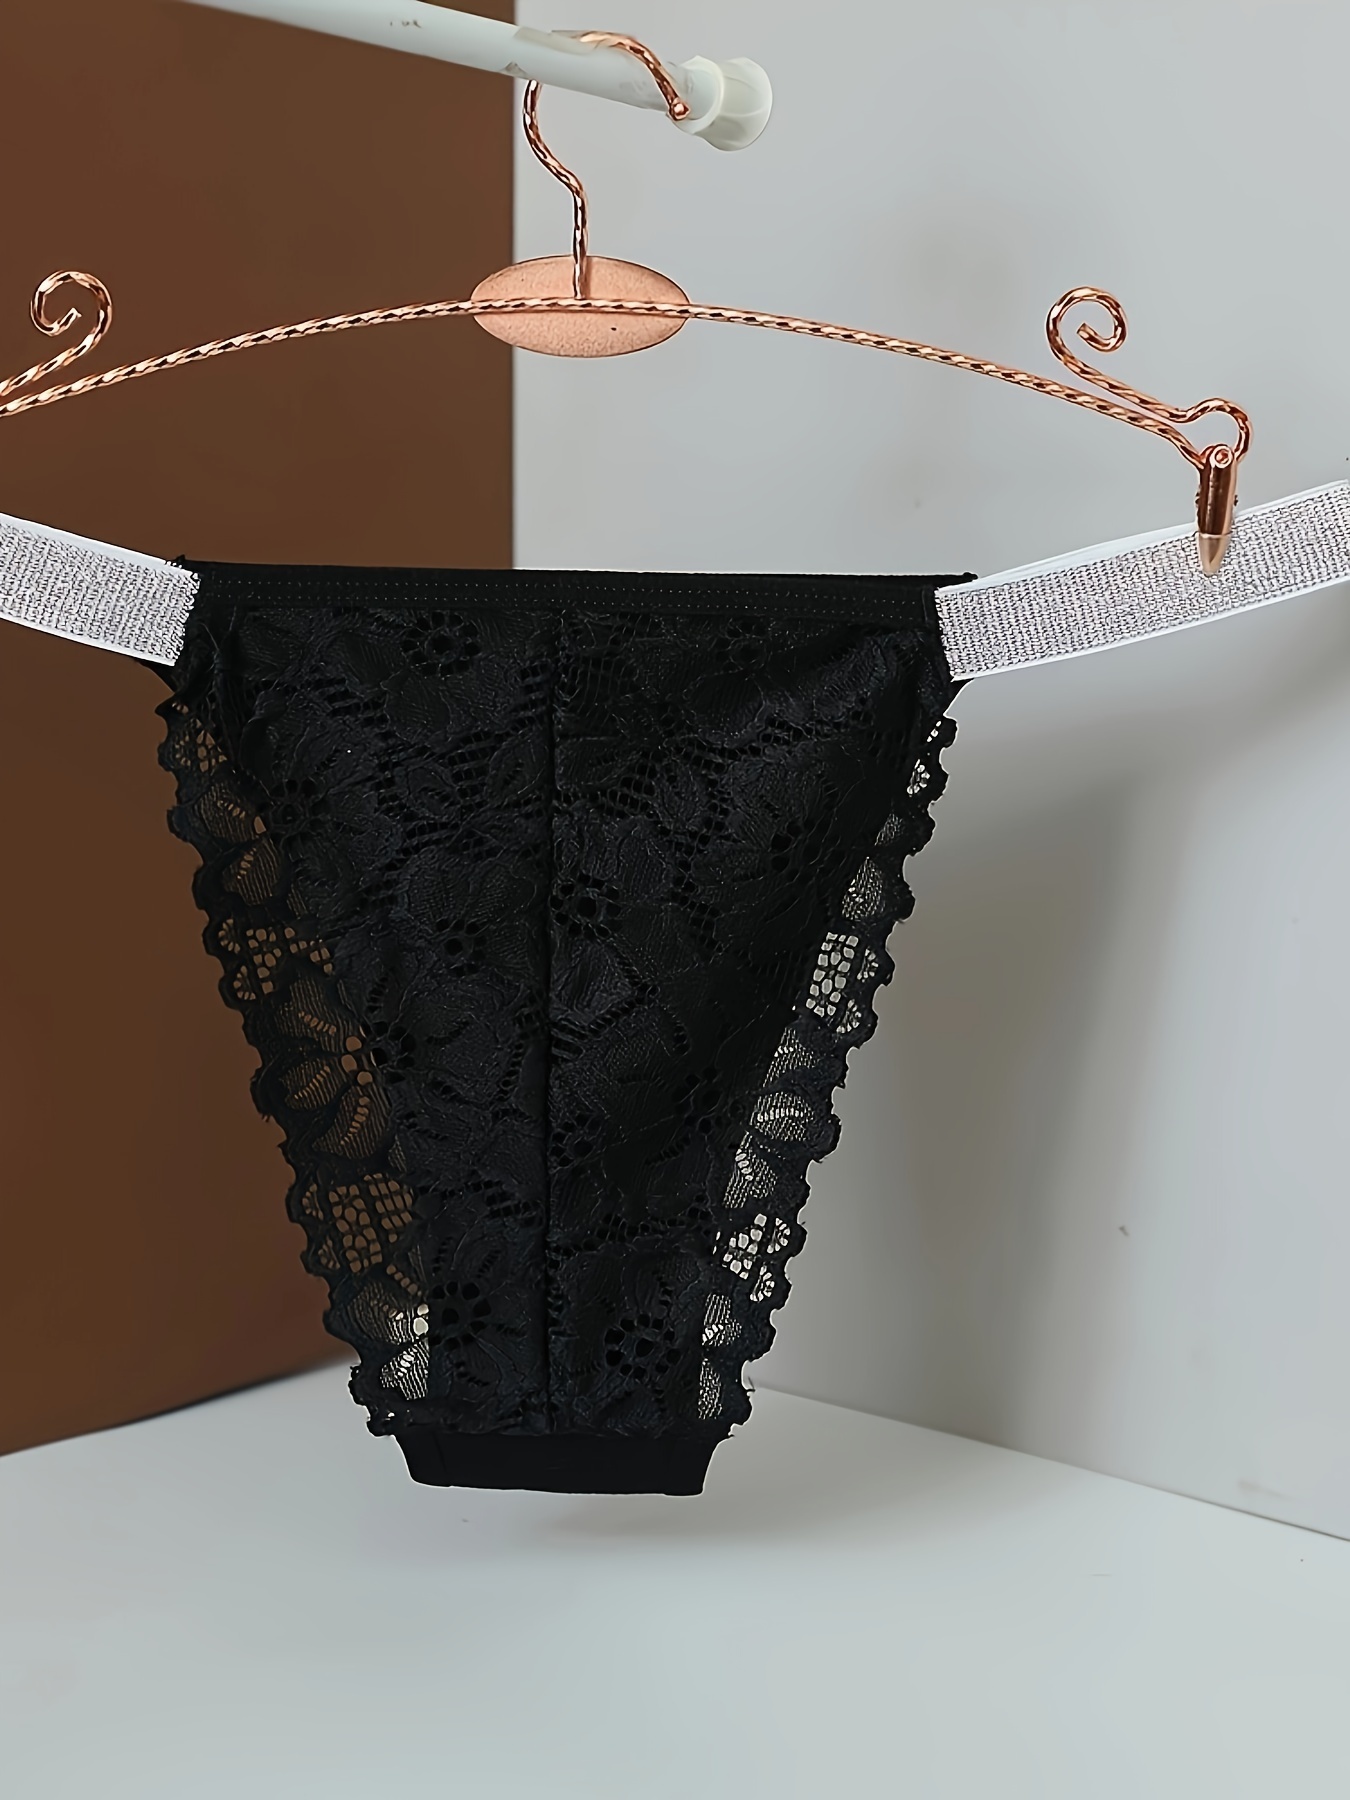 Ladies Boxer Black Cotton High Waisted Knickers Frilly Thongs Black Summer  Brief Shorts Knickers 26 Primark Shop Onlin : : Fashion